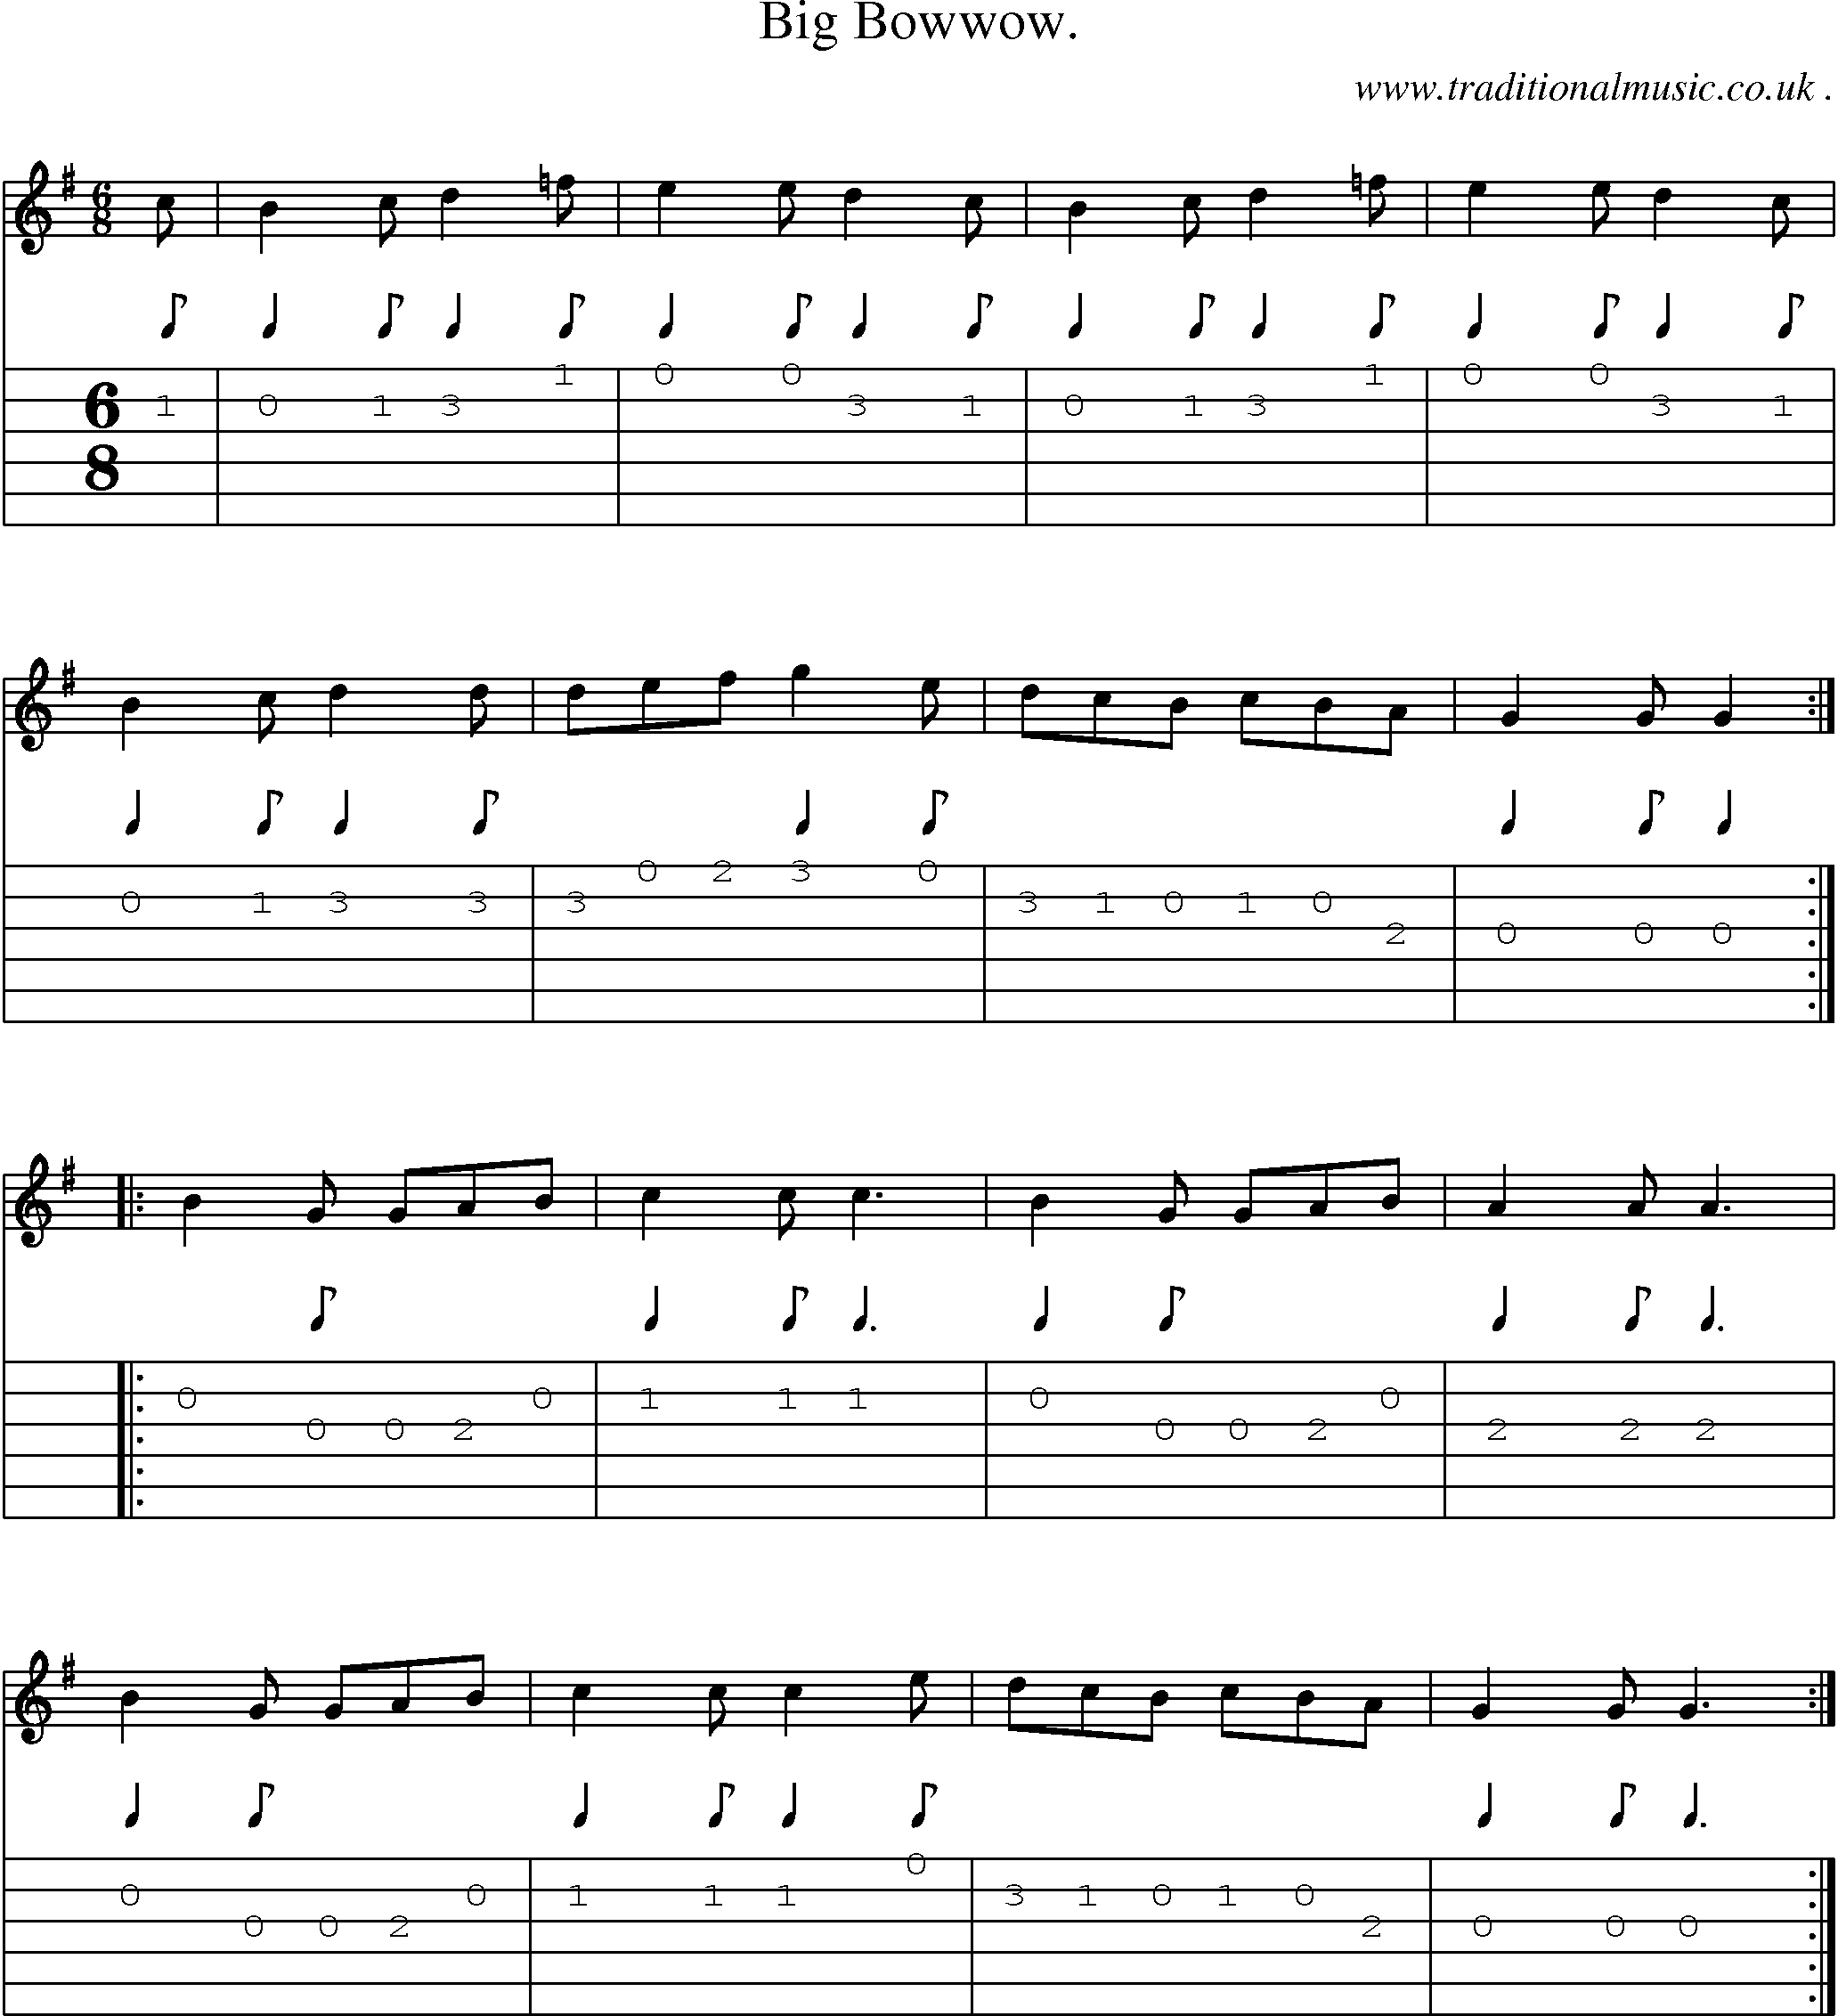 Sheet-Music and Guitar Tabs for Big Bowwow